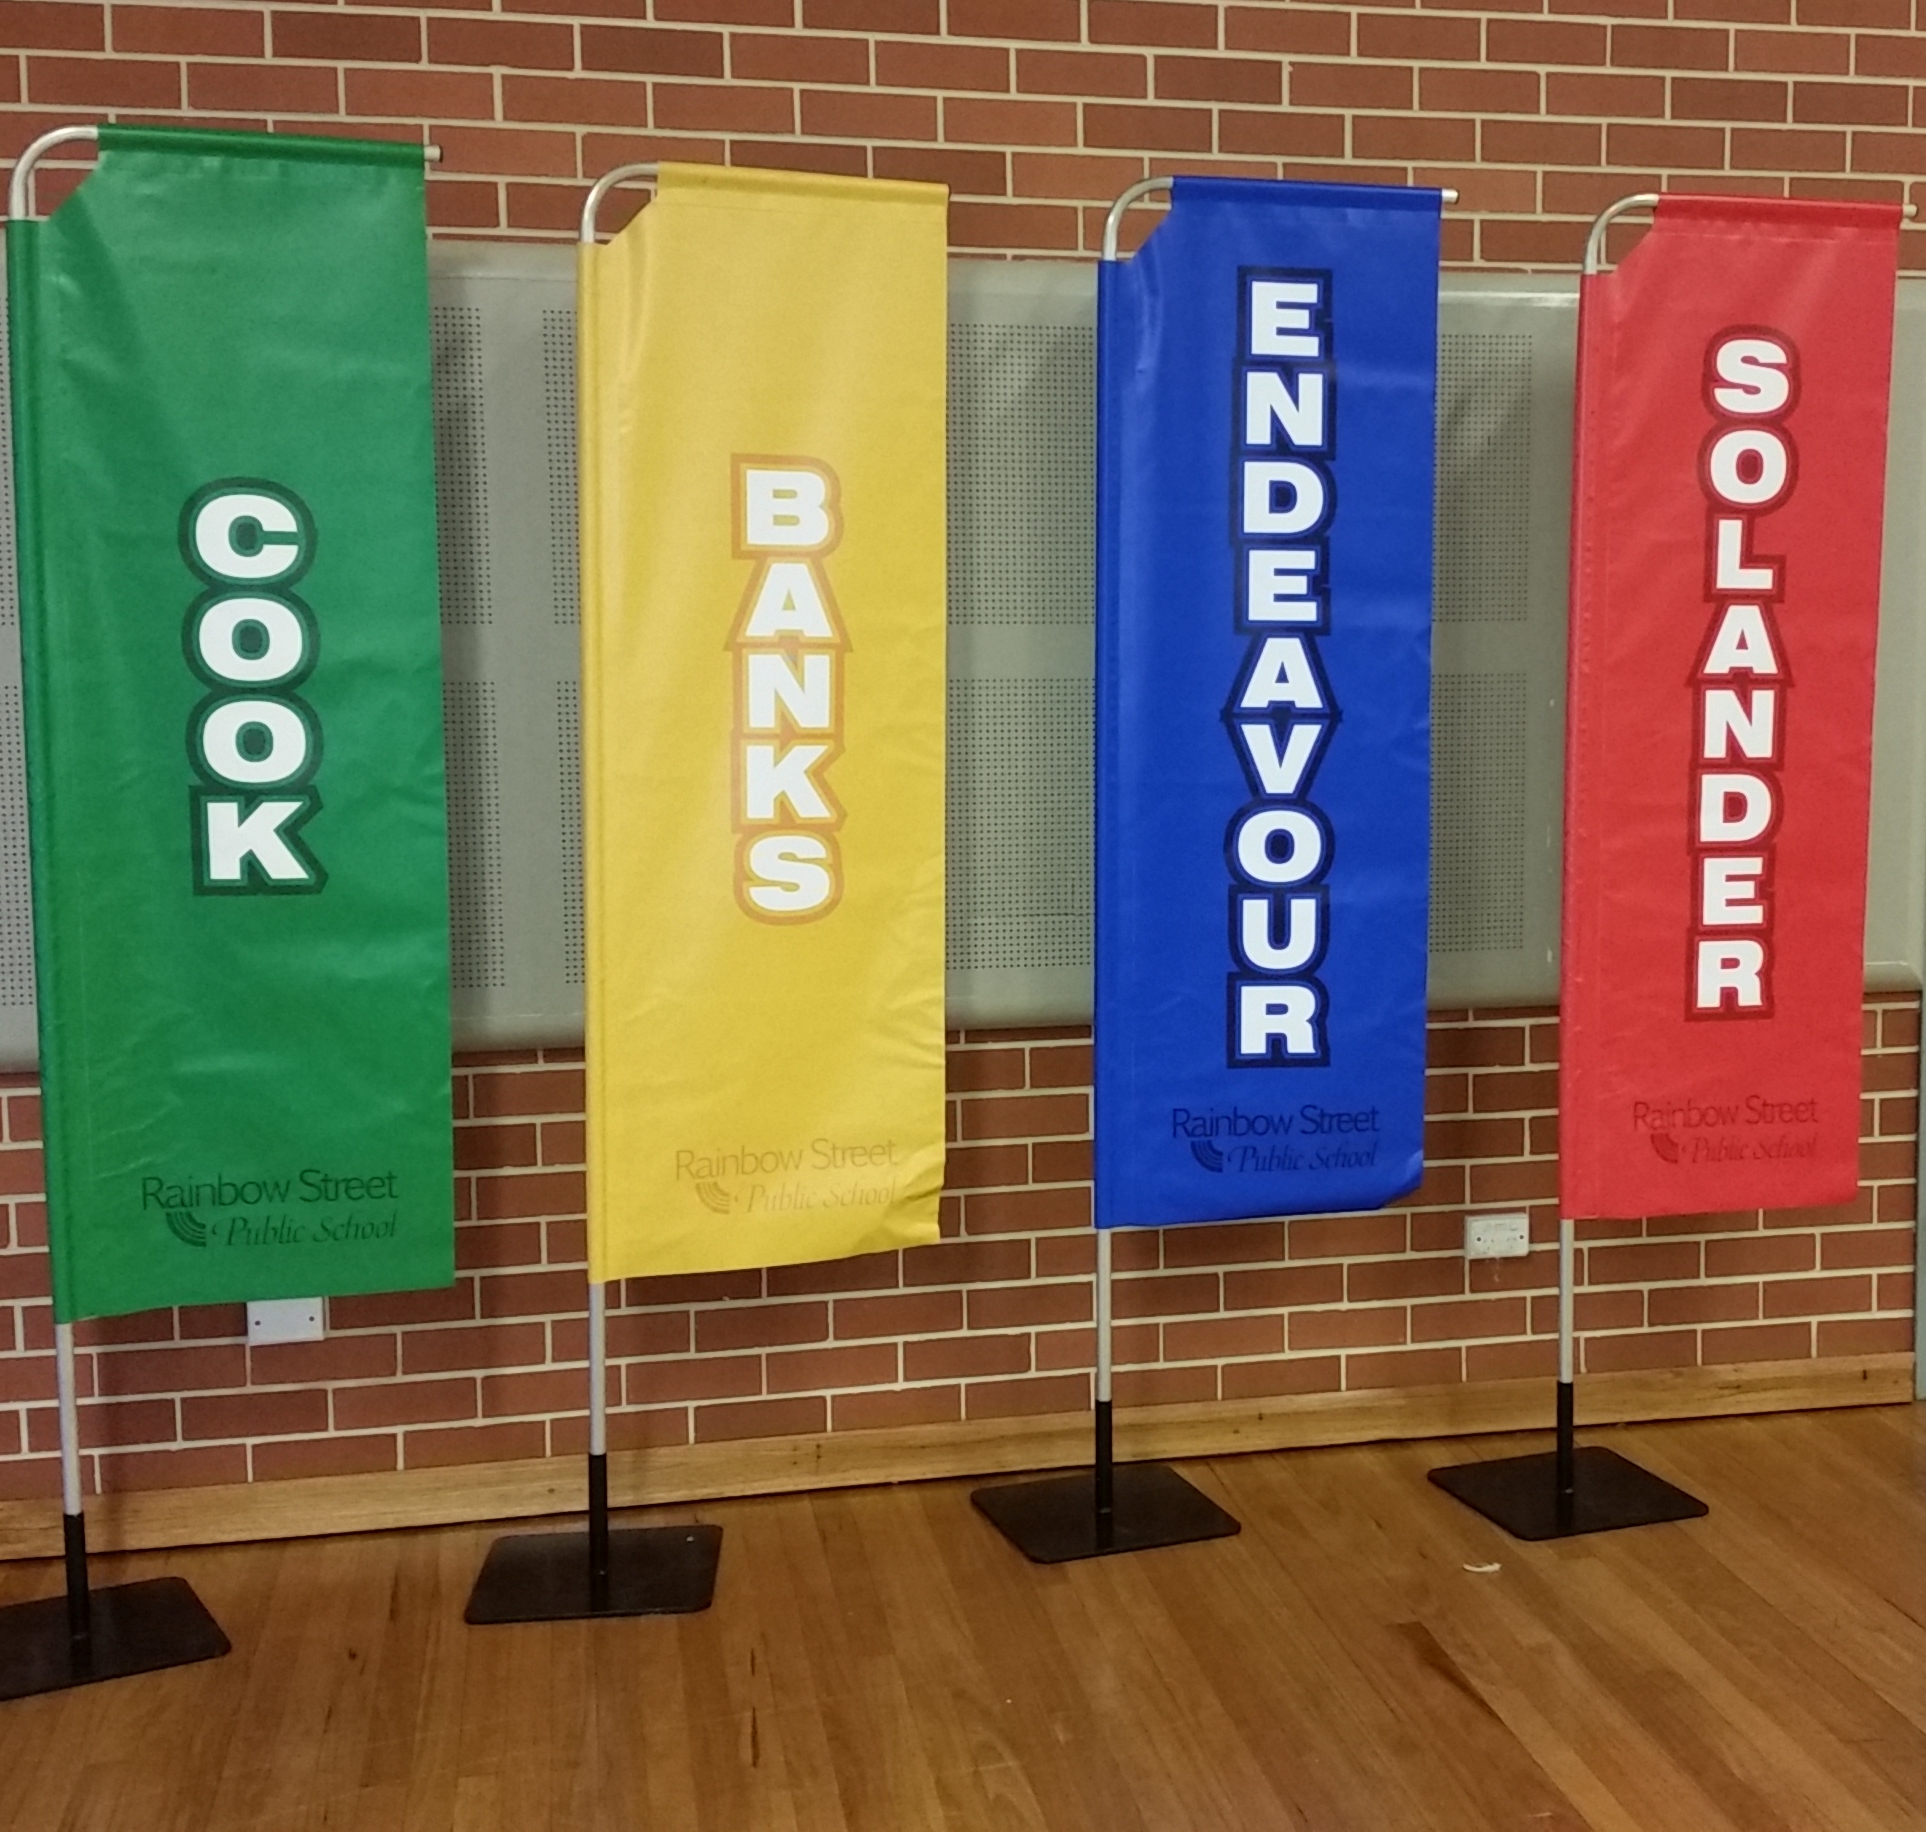 banners-flags-signs-by-signpac